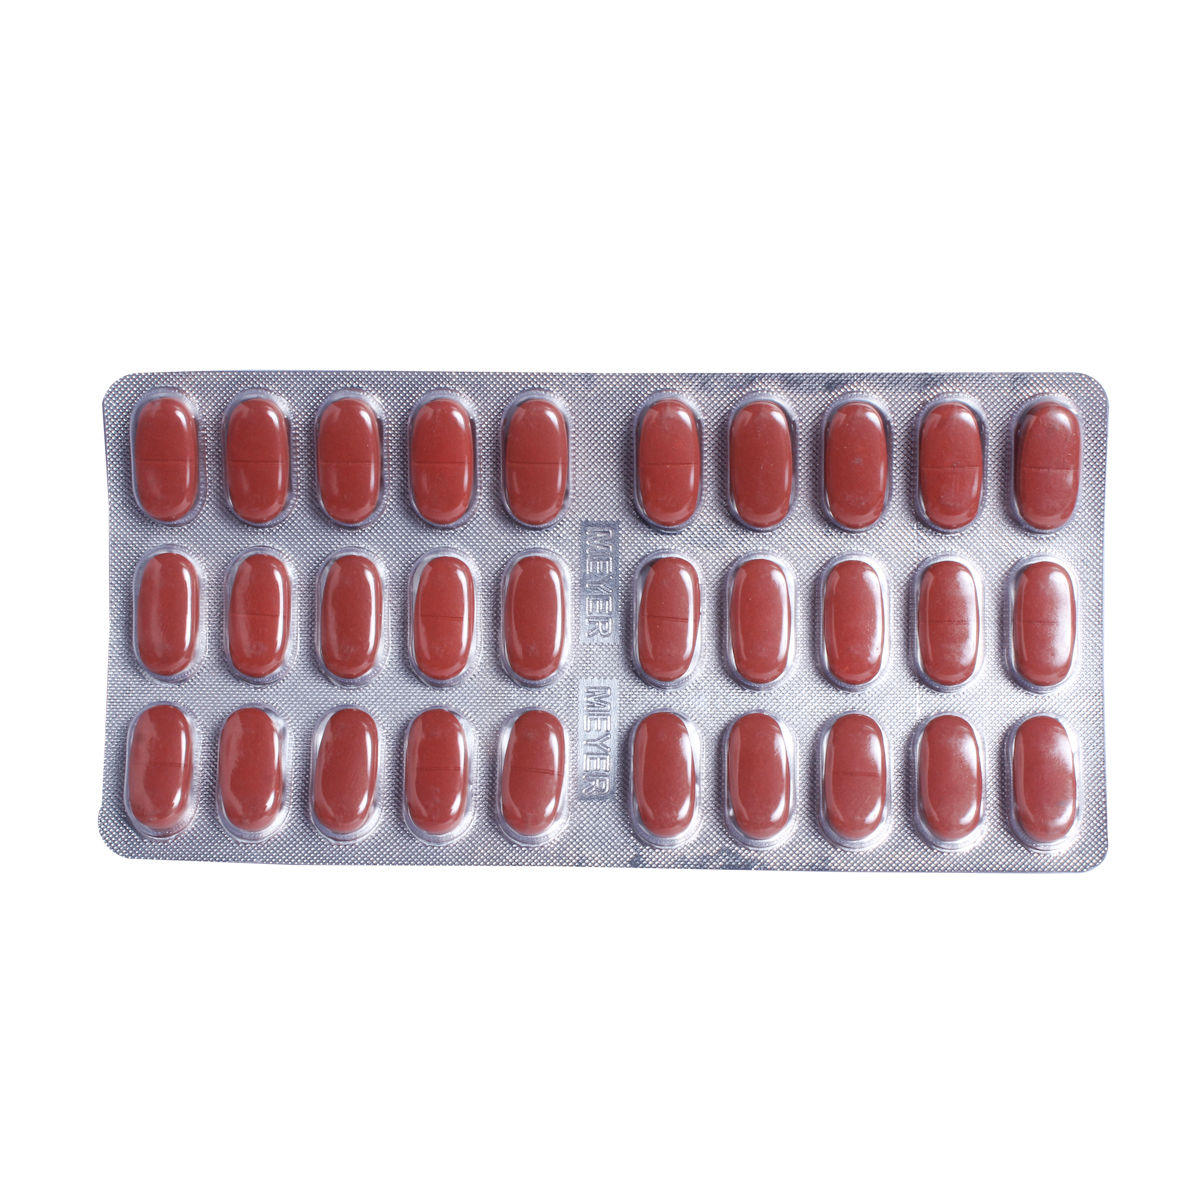 Ultra-Ca Plus Tablet 30's, Pack of 30 S